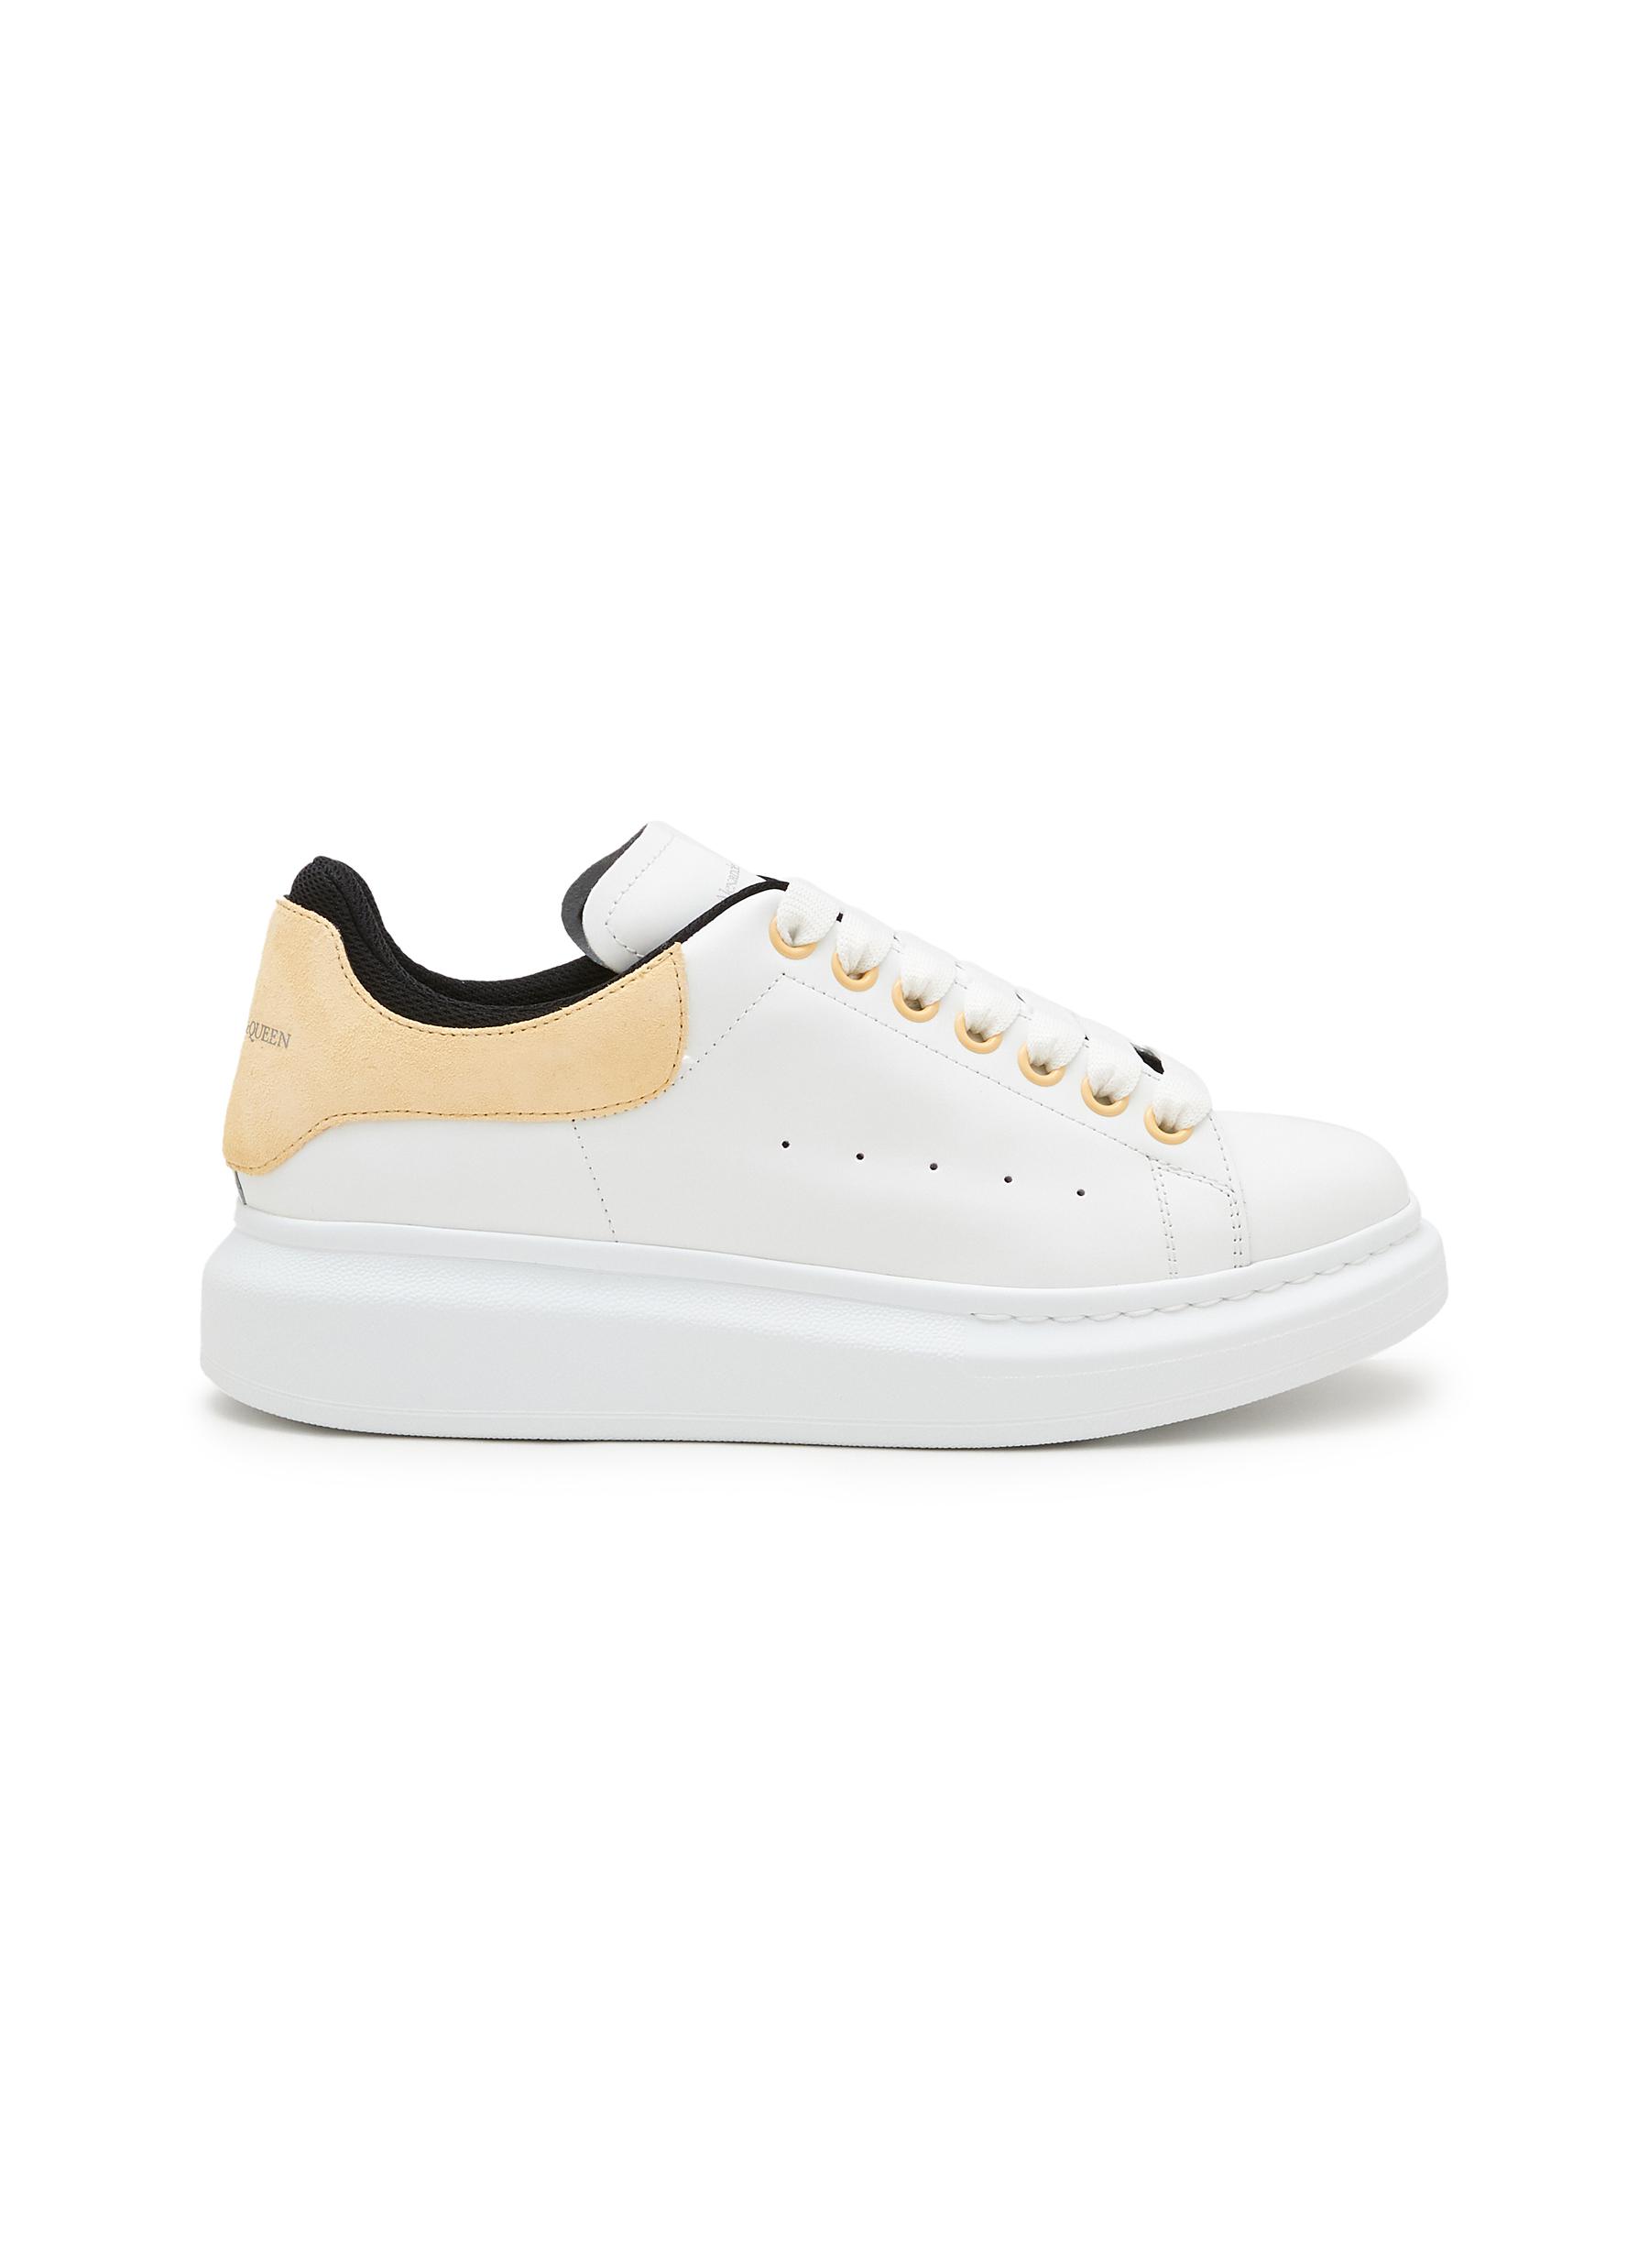 ‘Larry' Low Top Lace Up Leather Sneakers